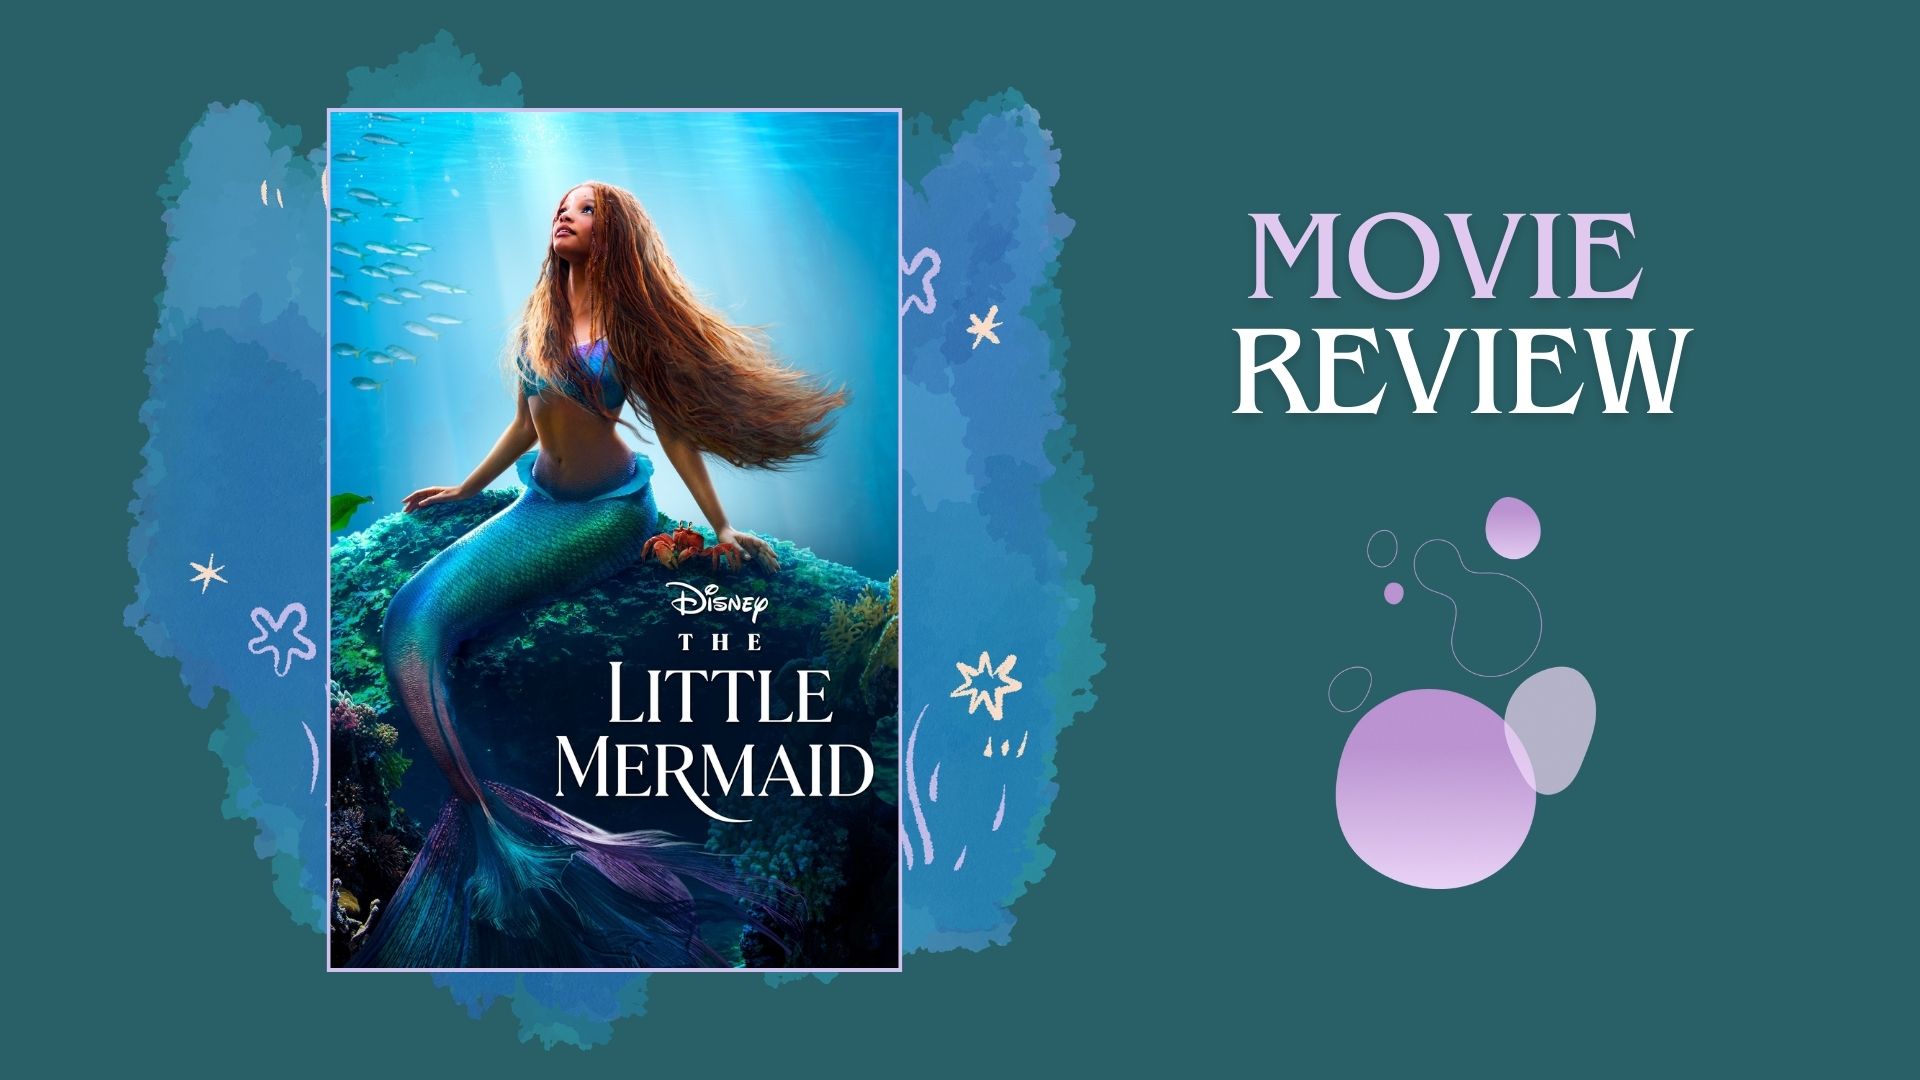 Cheyenne reviews The Little Mermaid and talks about some of her opinions and controversial opinions people had about the movie. 